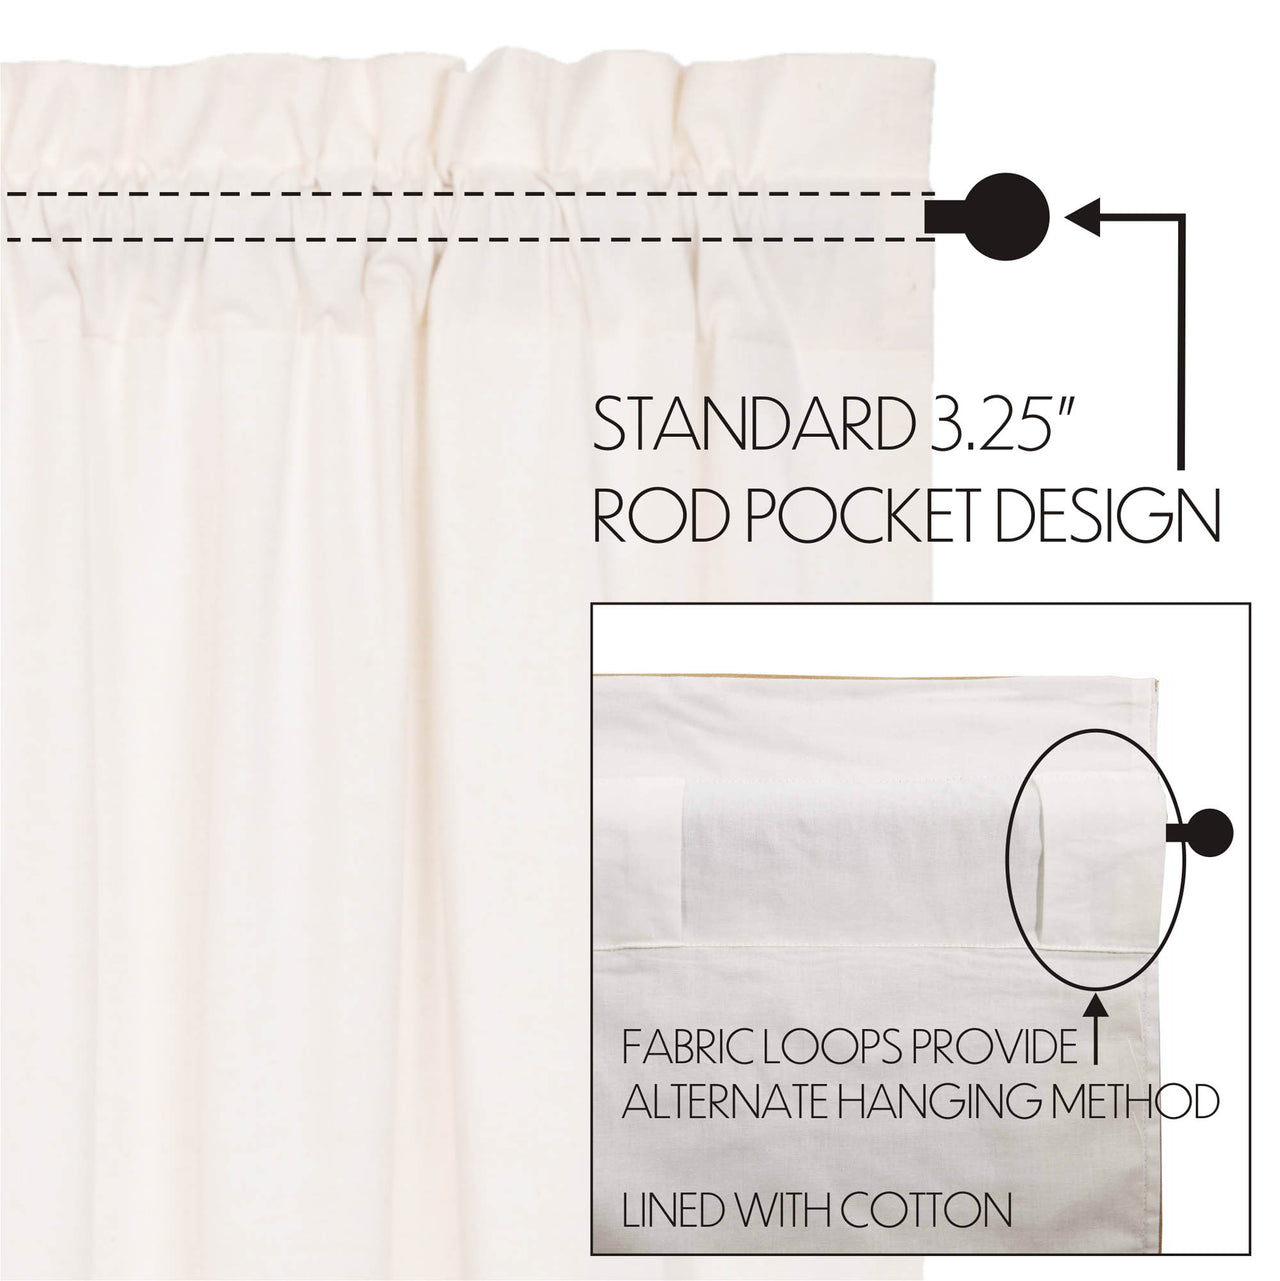 Simple Life Flax Antique White Prairie Long Panel Curtain Set of 2 84x36x18 VHC Brands